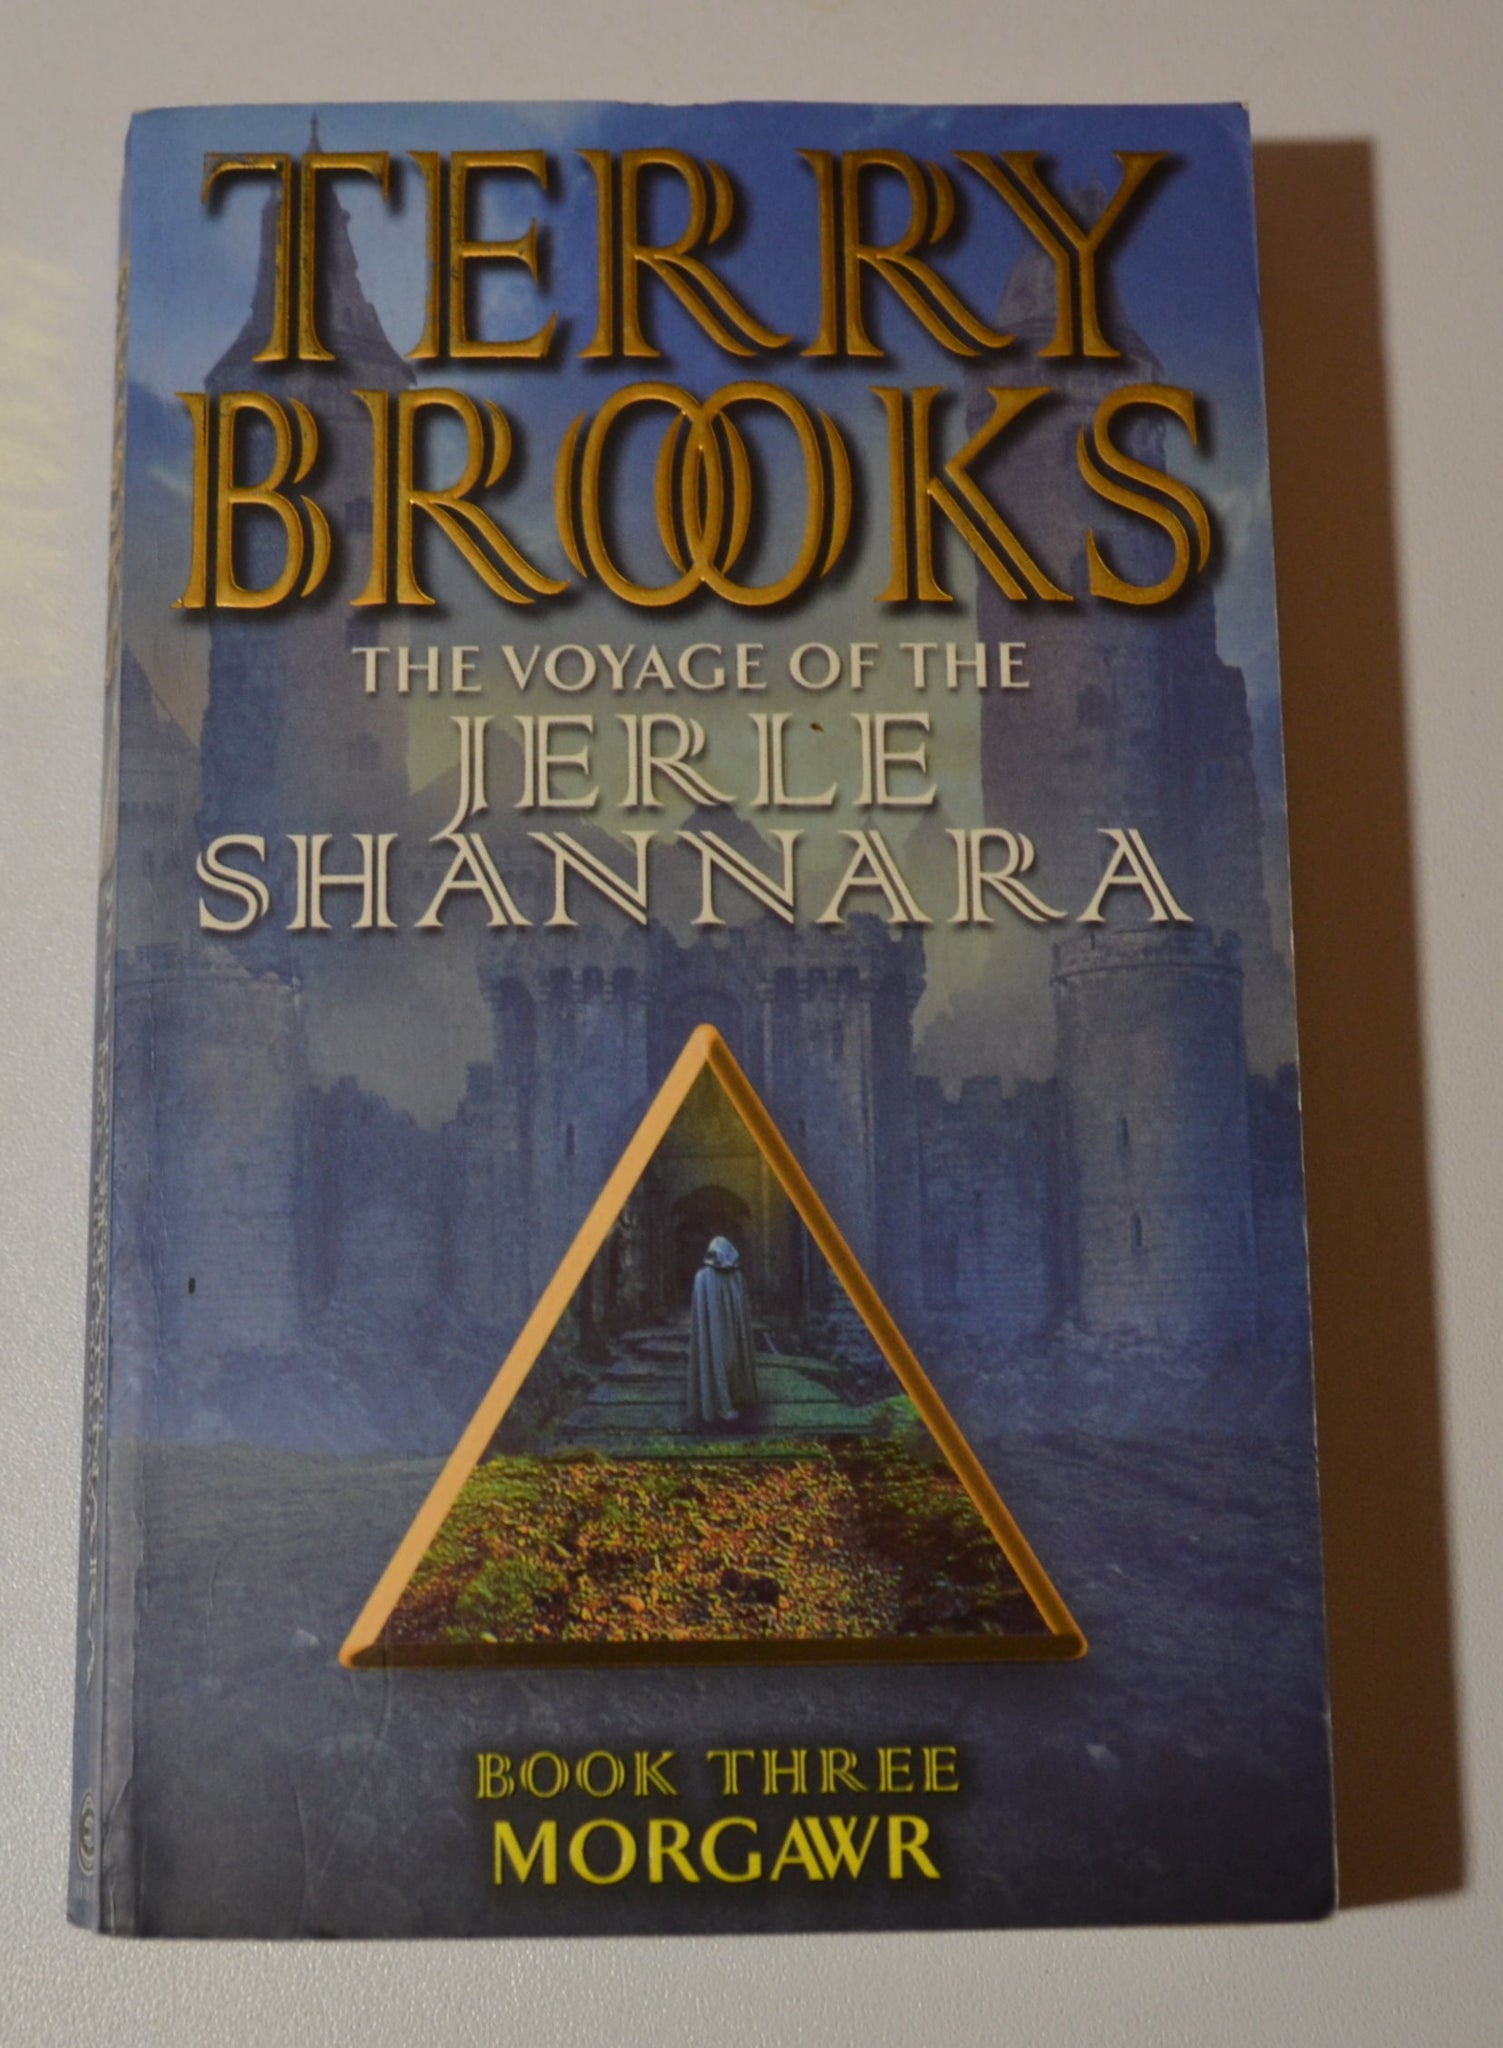 Morgawr - The Voyage of the Jerle Shannara book 3